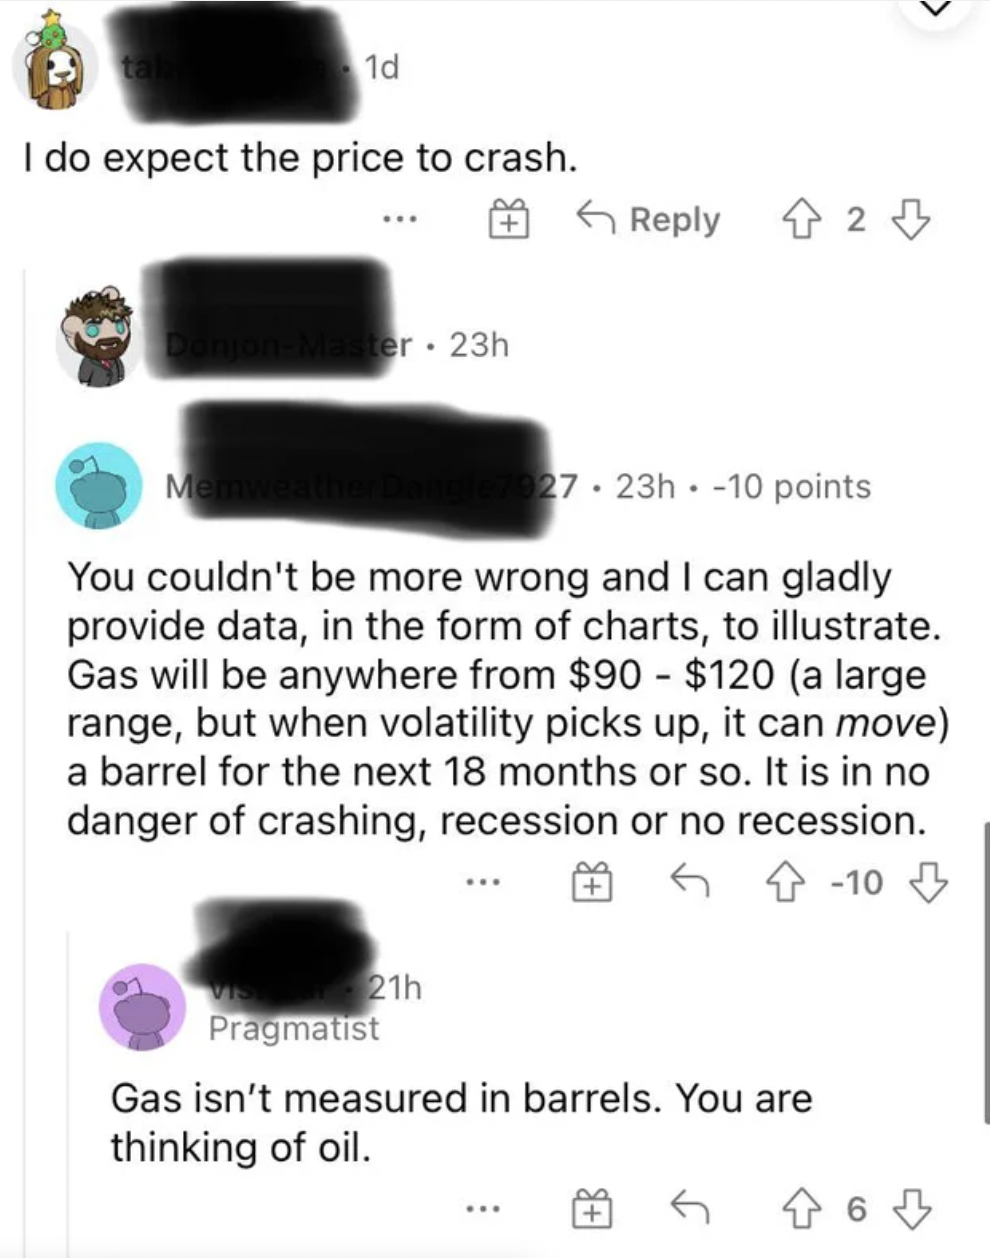 This person must be so upset every time gas prices rise just because oil prices do. 